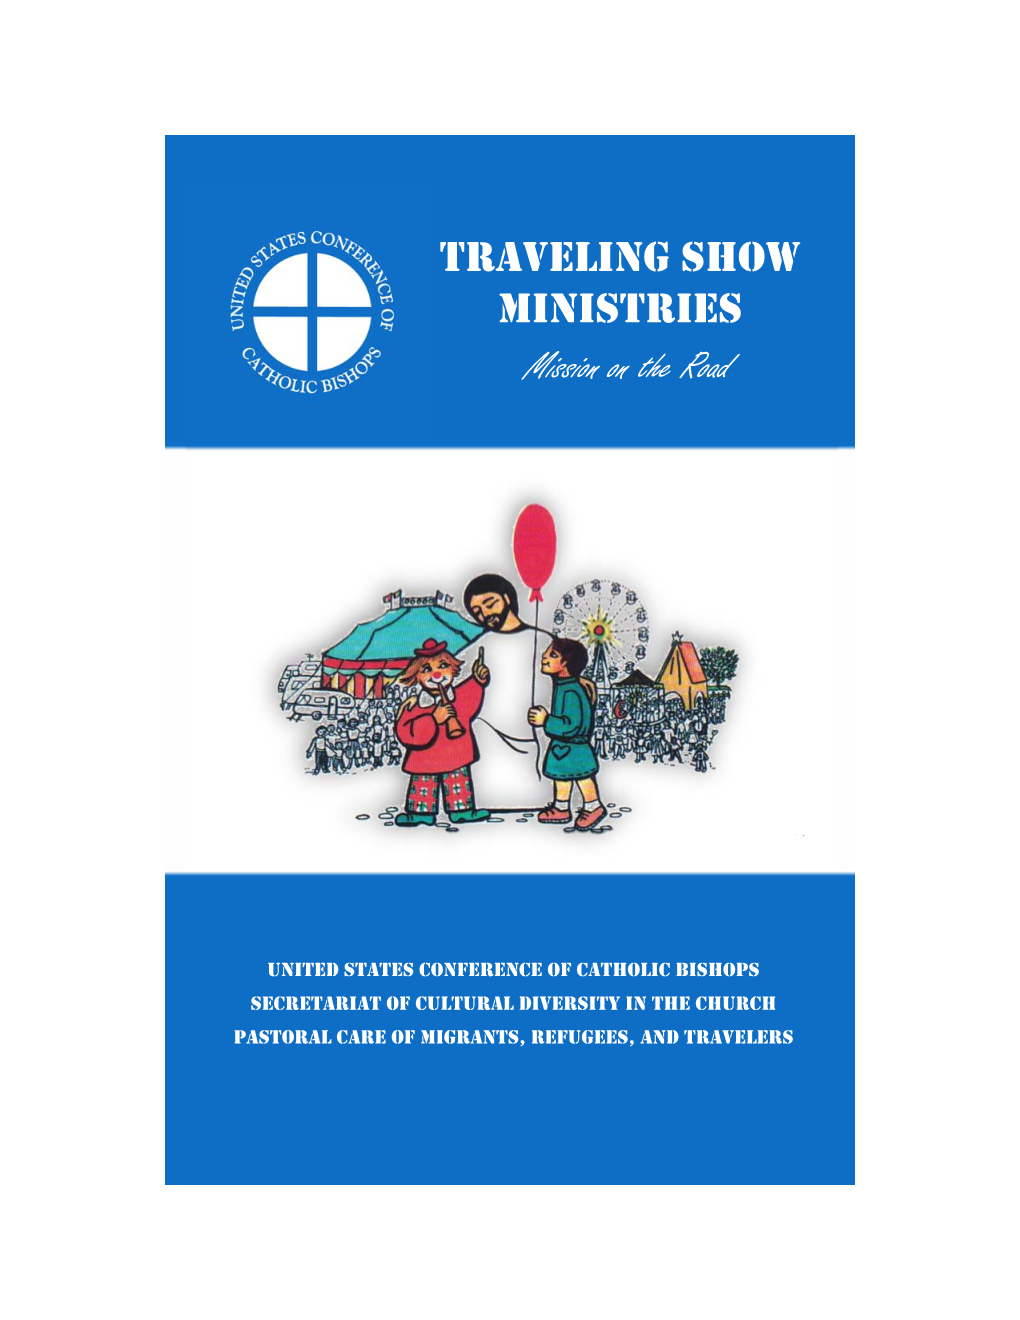 PCMRT Traveling Show Ministry Brochure.Pub